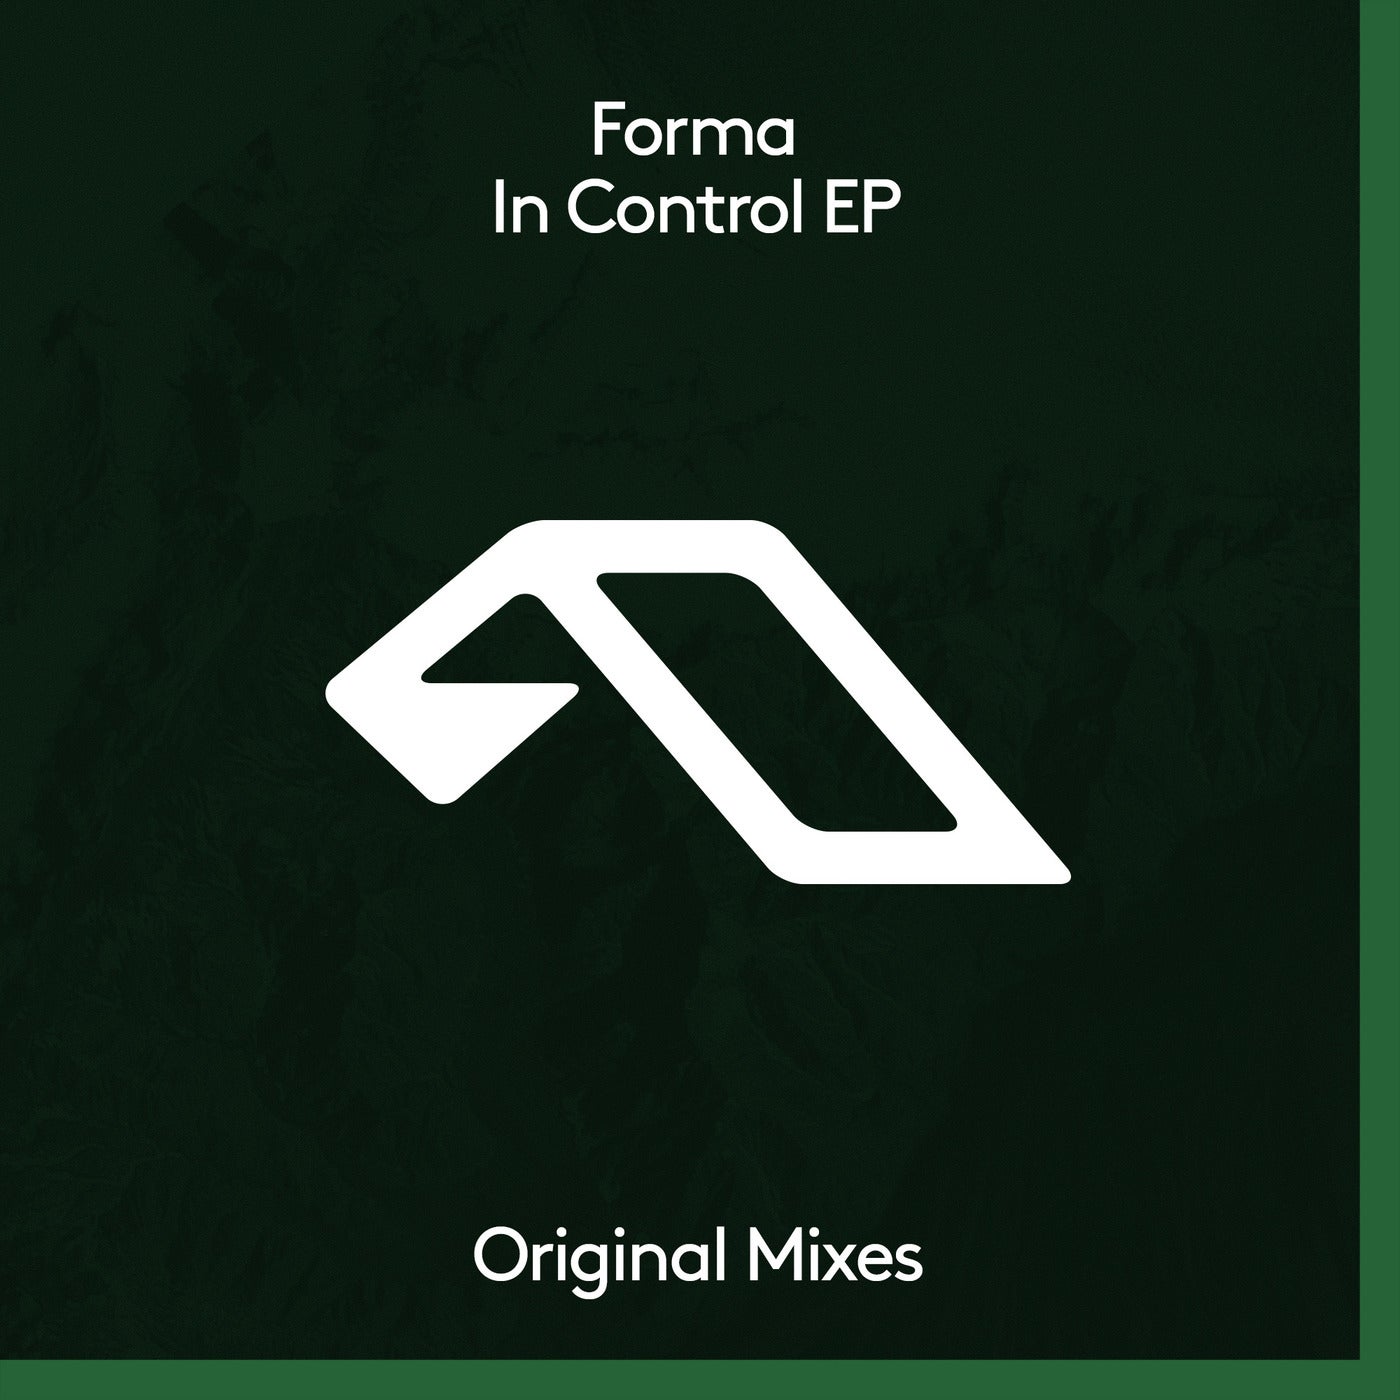 In Control EP